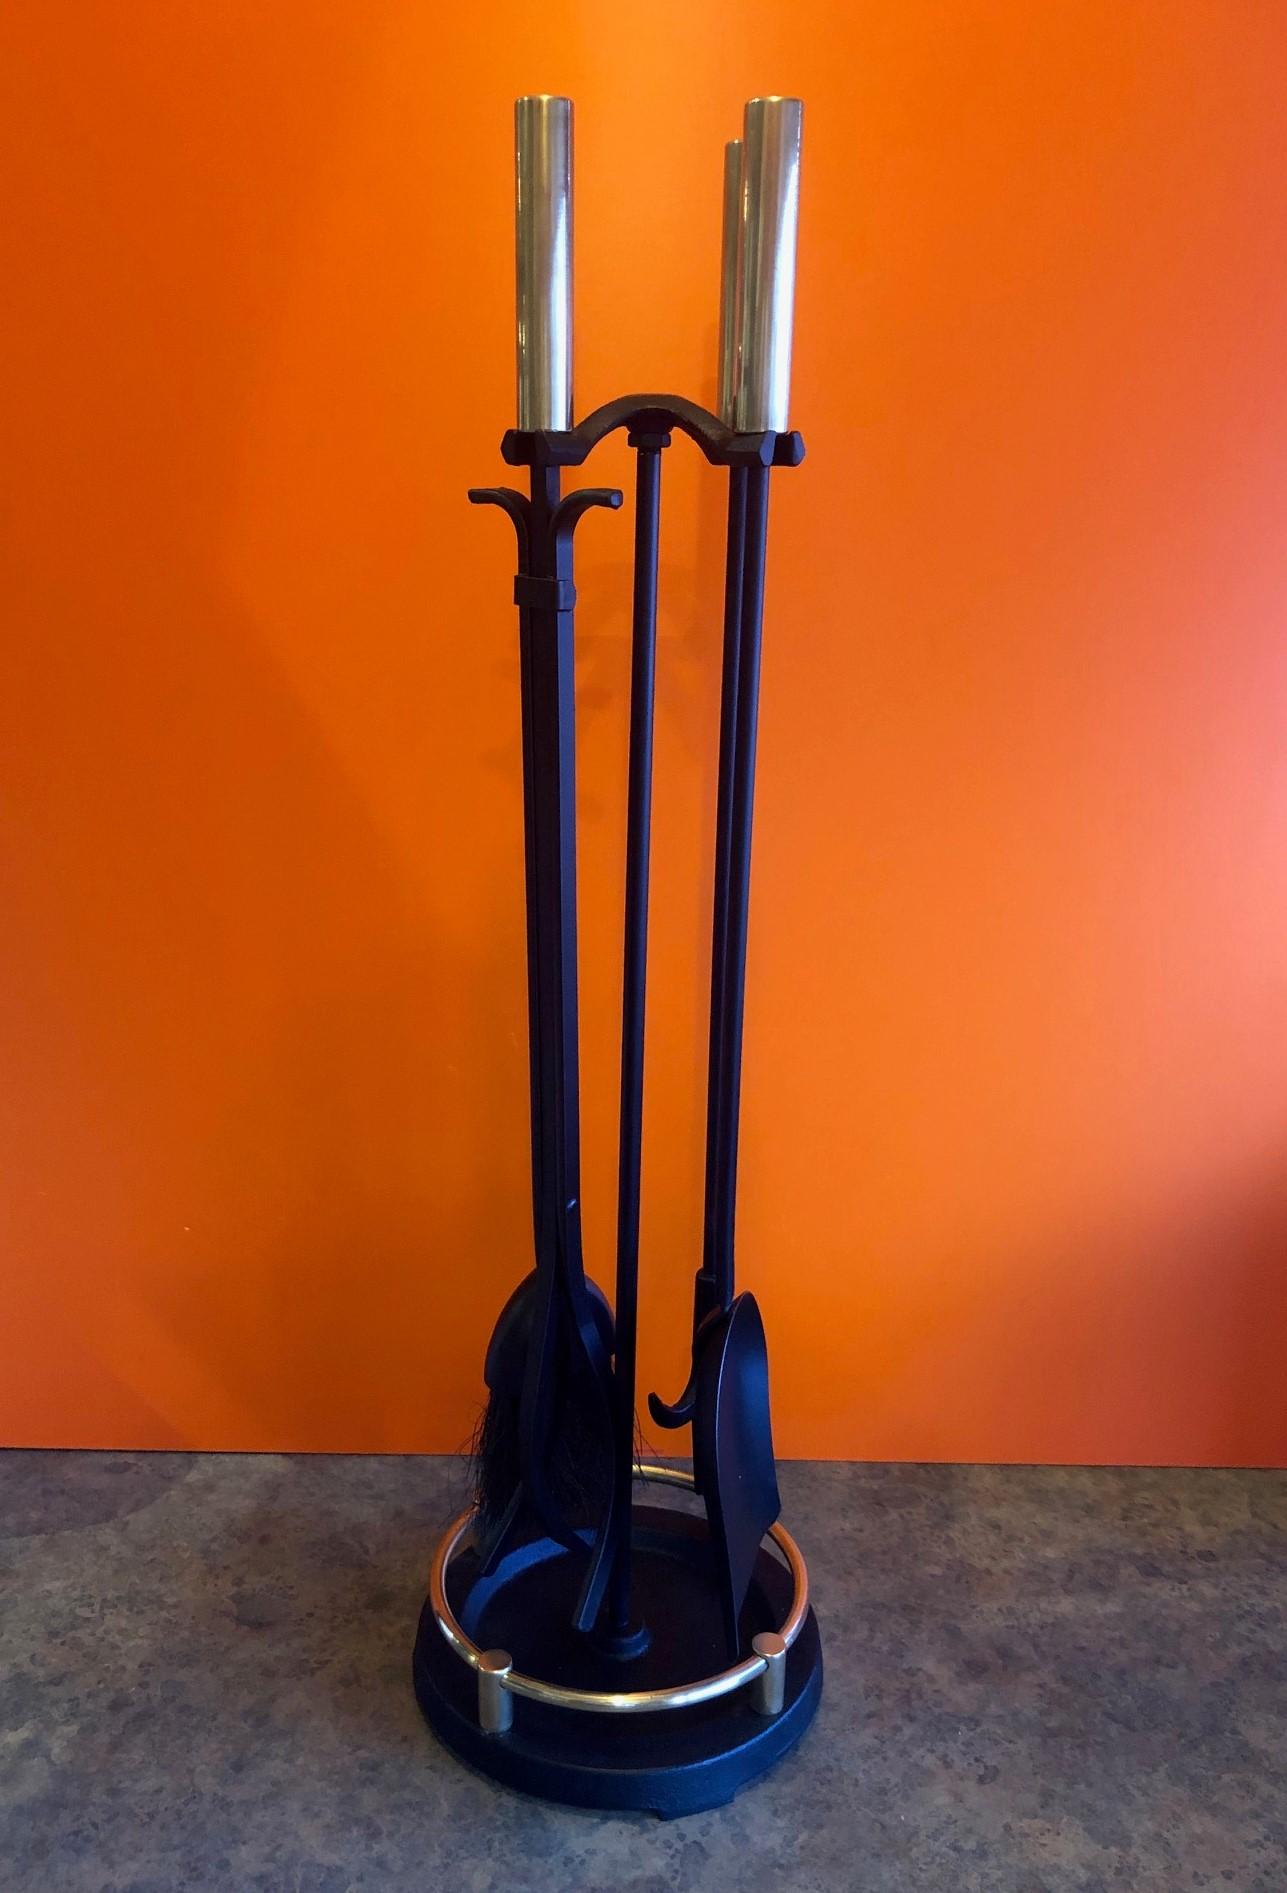 Midcentury American modern set of fireplace tools by Pilgrim, circa 1960s. The set has been professionally polished and refinished and looks fantastic! There are four tools with polished brass cylindrical handles supported by an integral